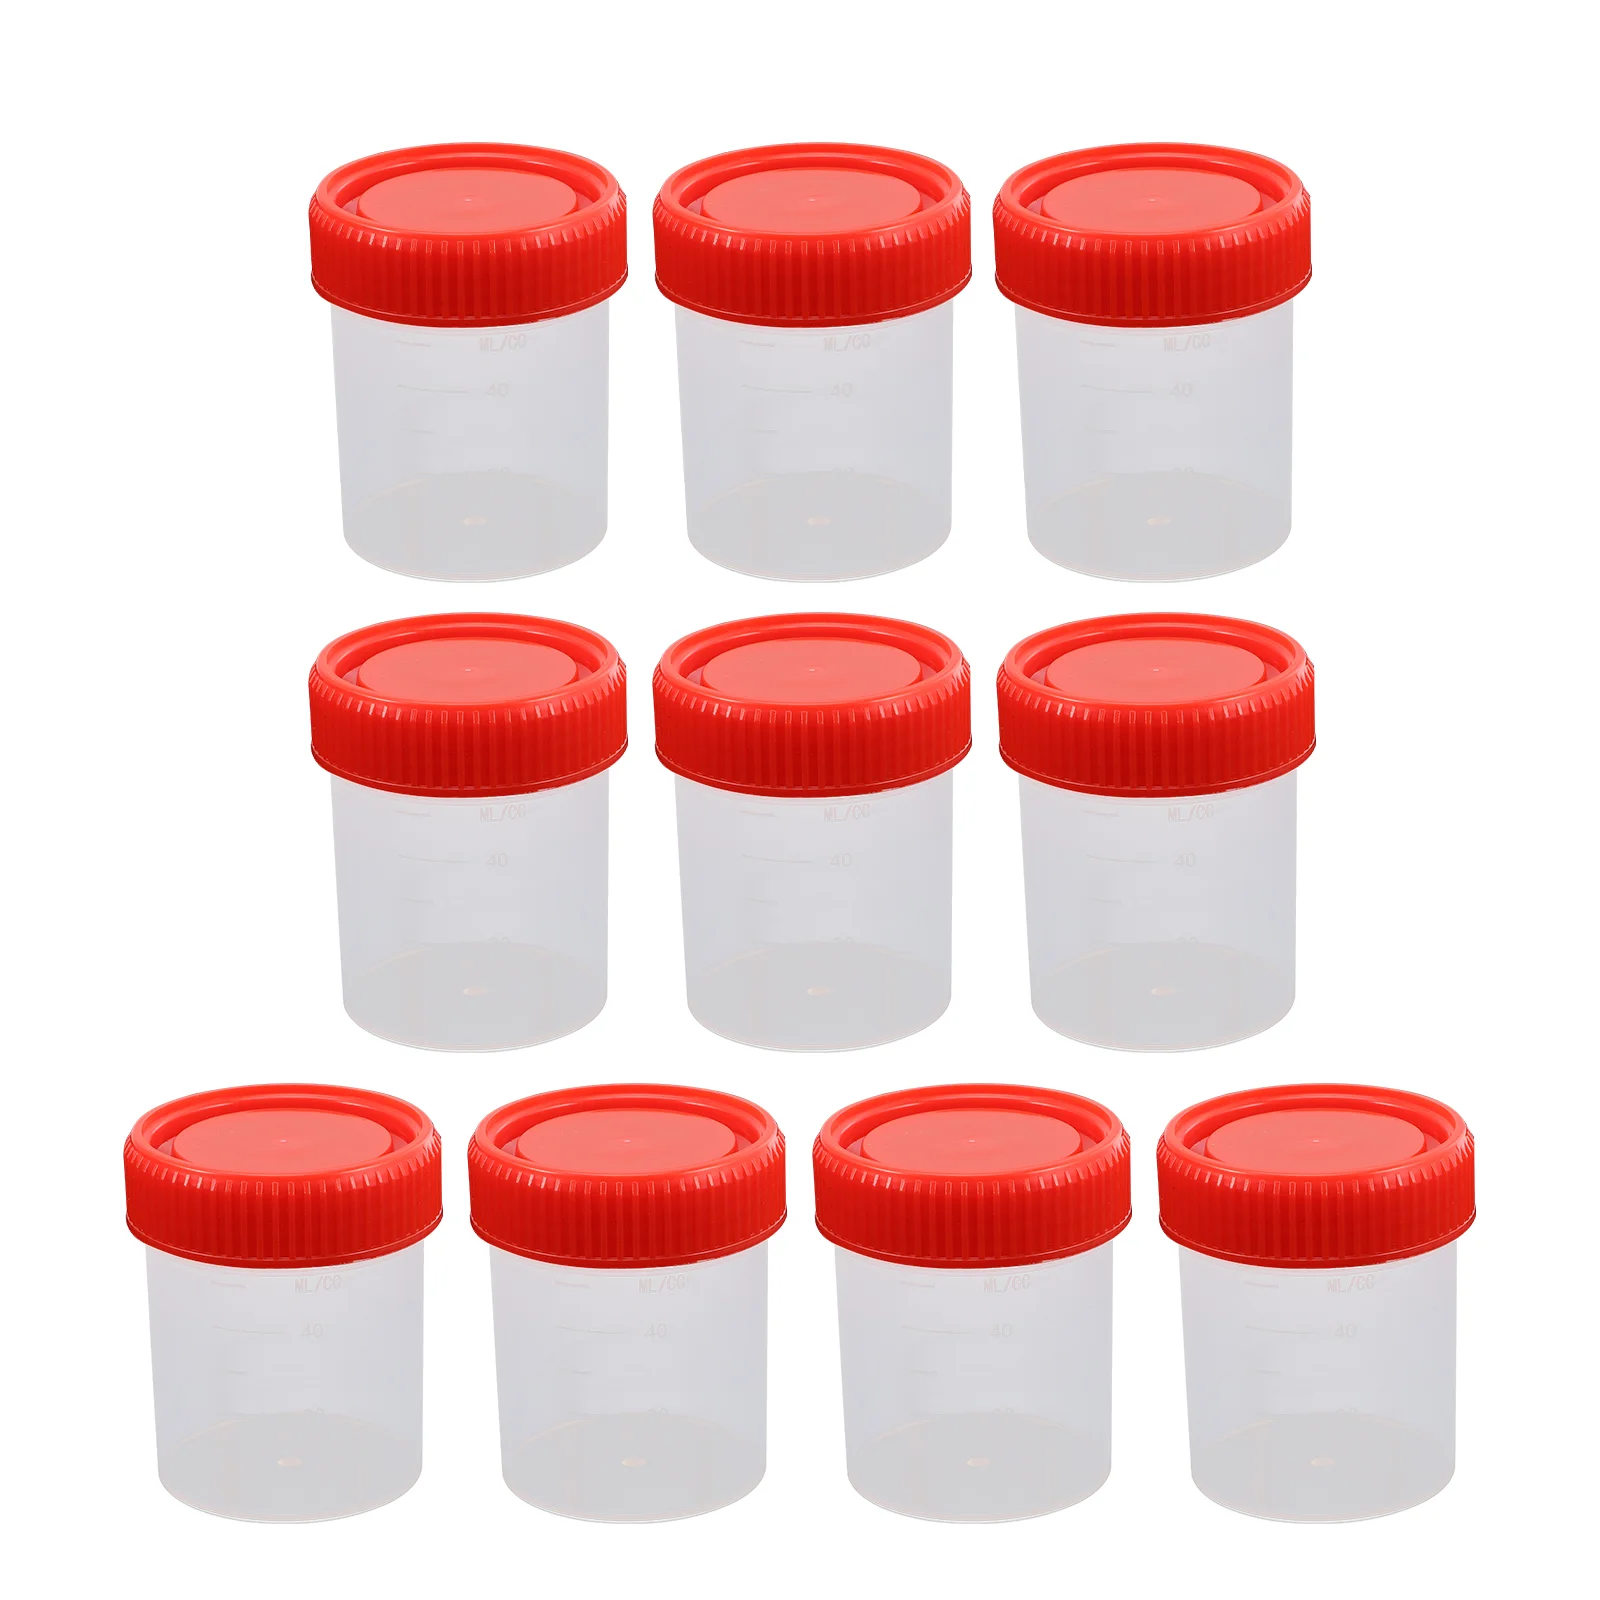 

10 Pcs Sample Cup Plastic Mug Specimen Cups Urine with Screw Caps Cover Lids Containers Pp Collection